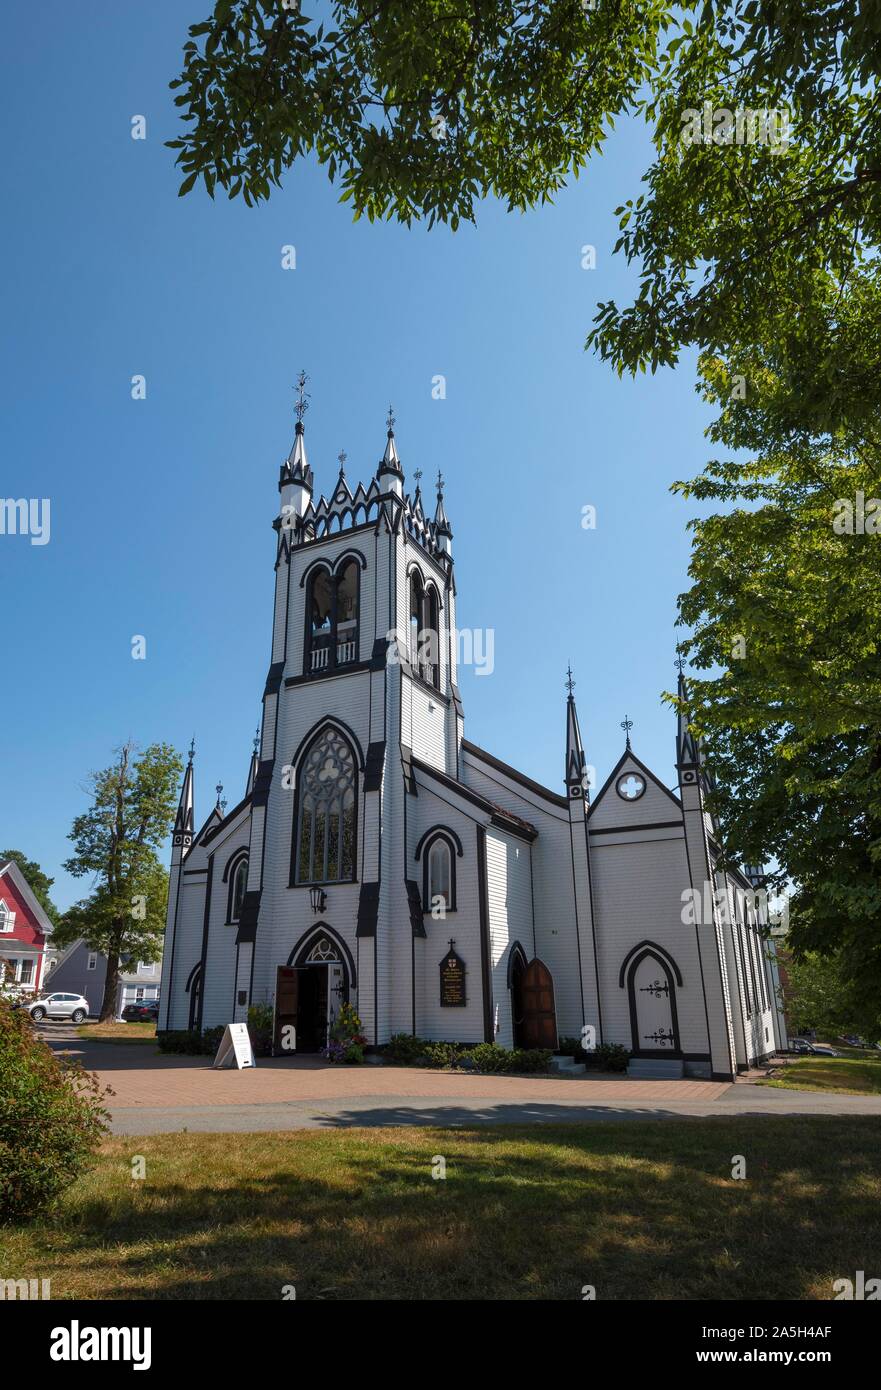 The Anglican Church of St. John's in the Old Town of Lunenburg, Nova Scotia, Canada Stock Photo